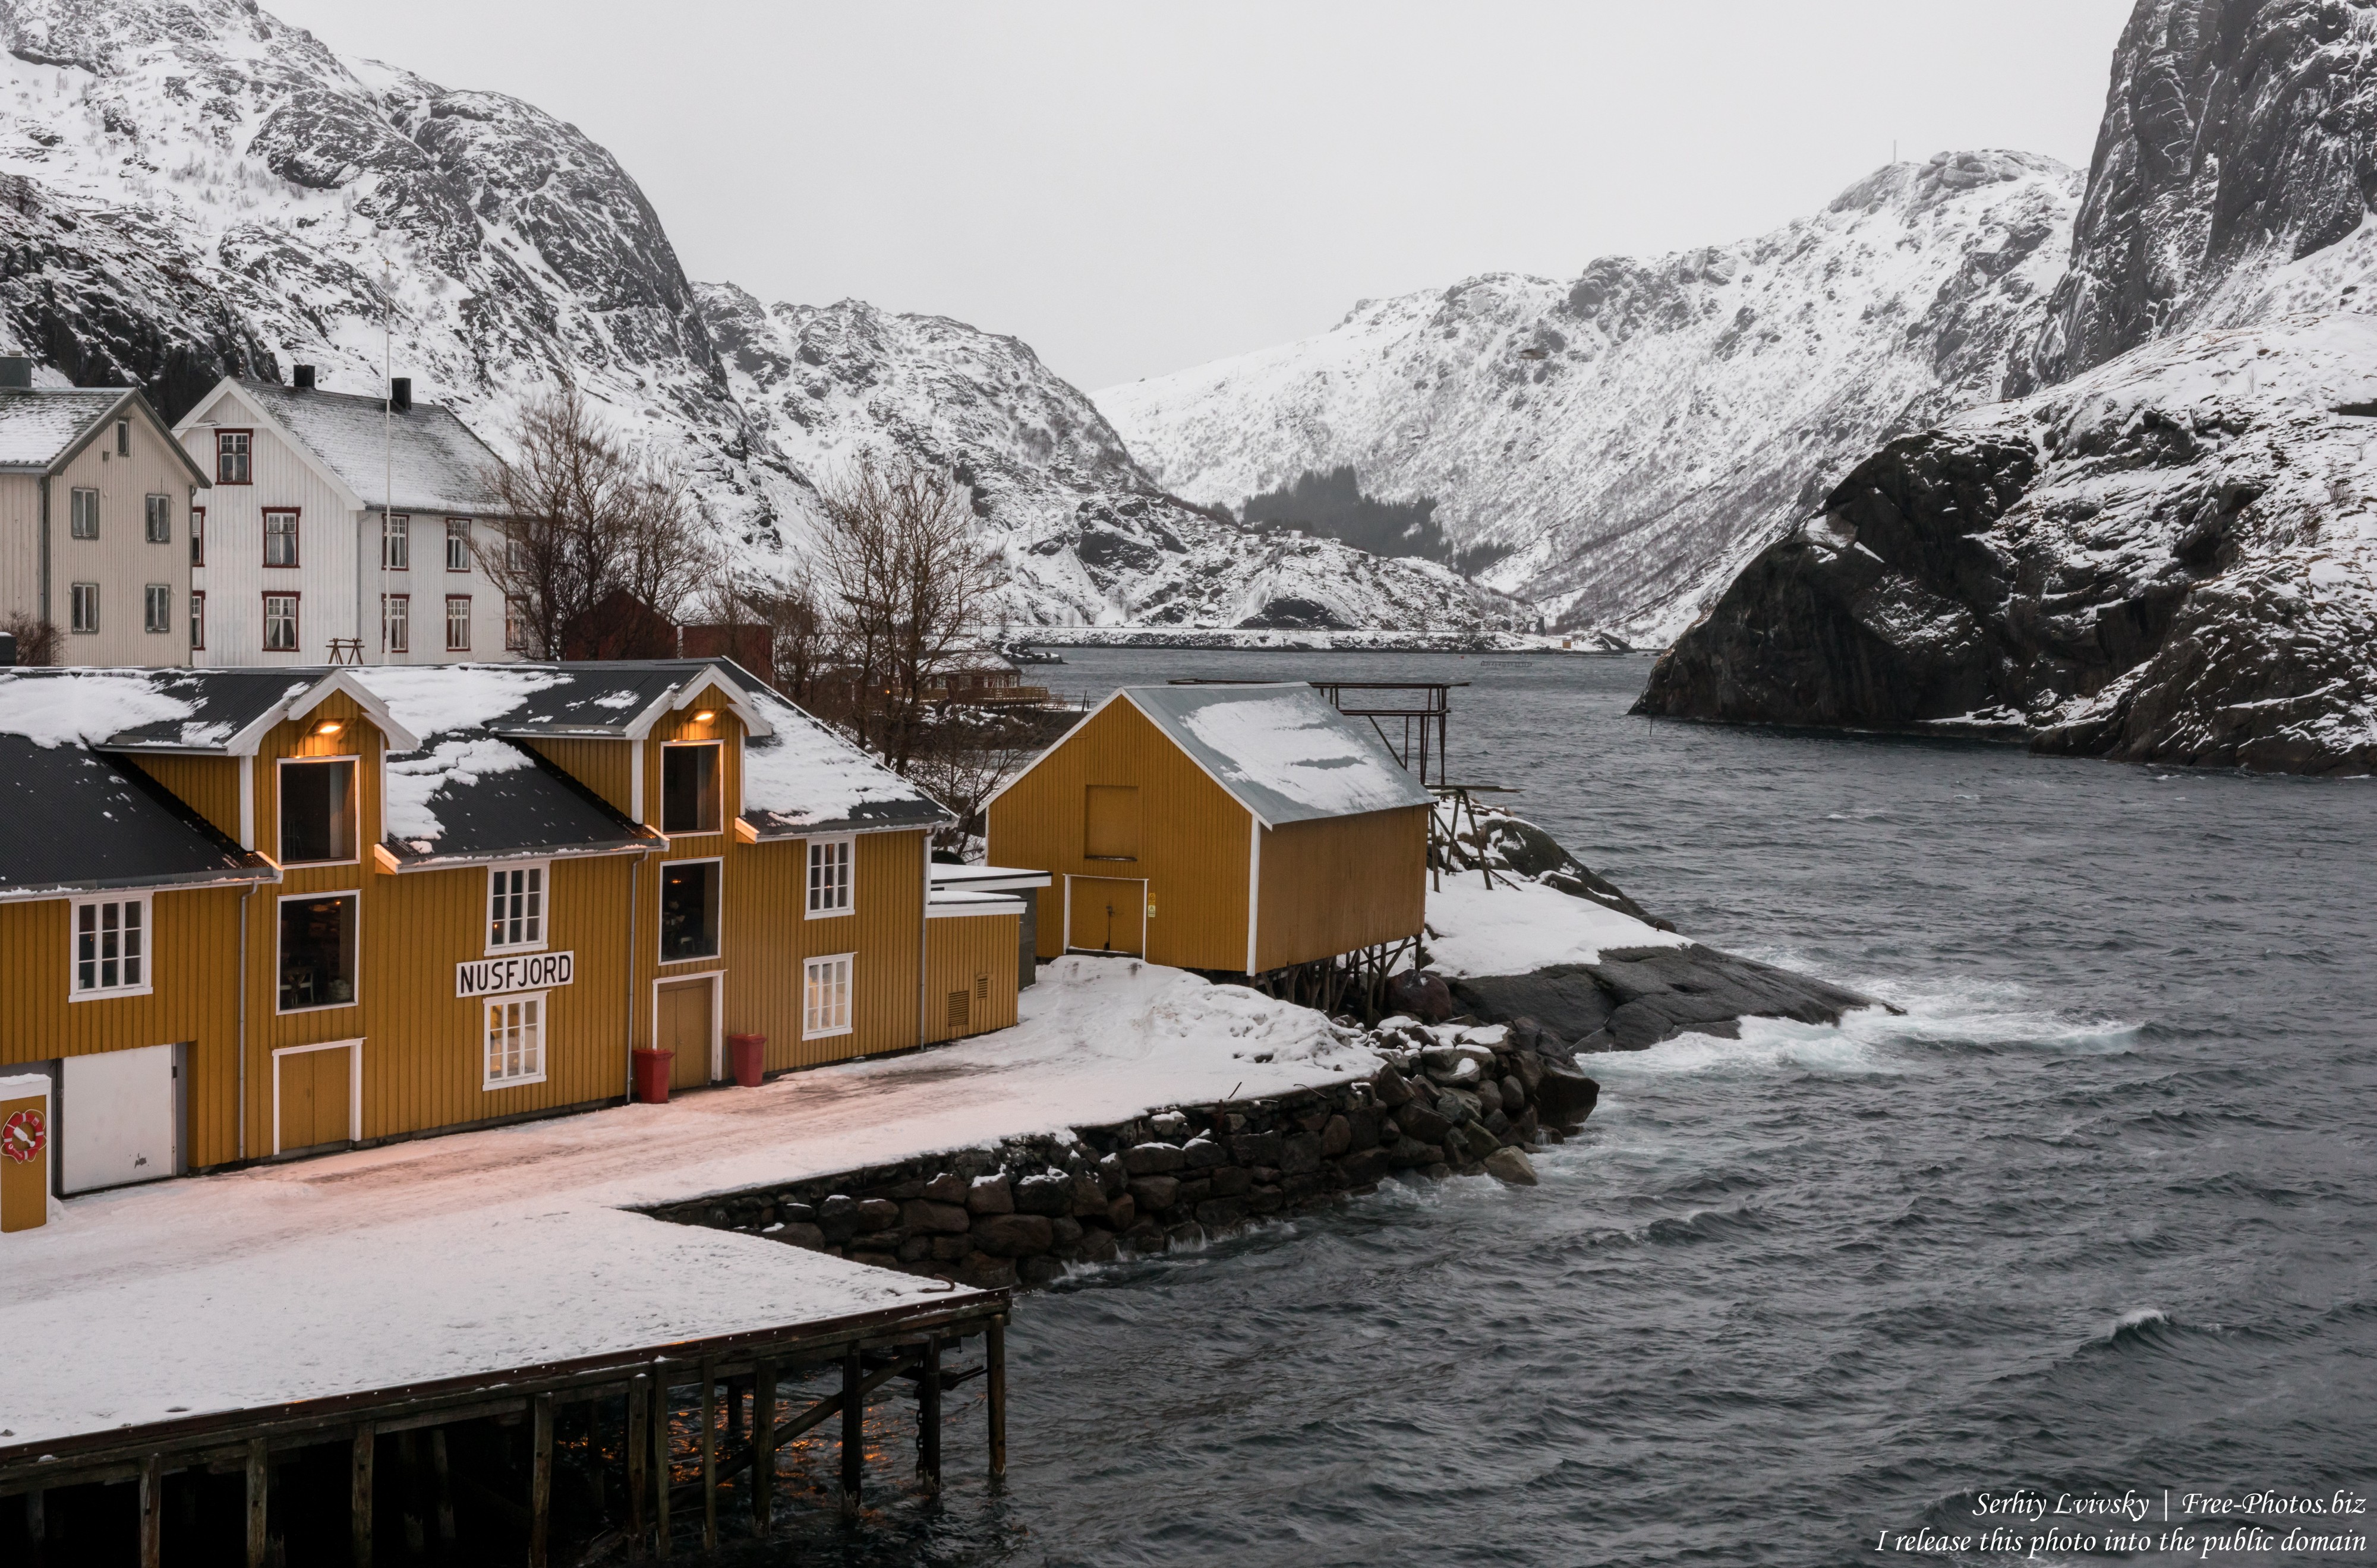 Nusfjord, Norway, in February 2020, photographed by Serhiy Lvivsky, picture 5